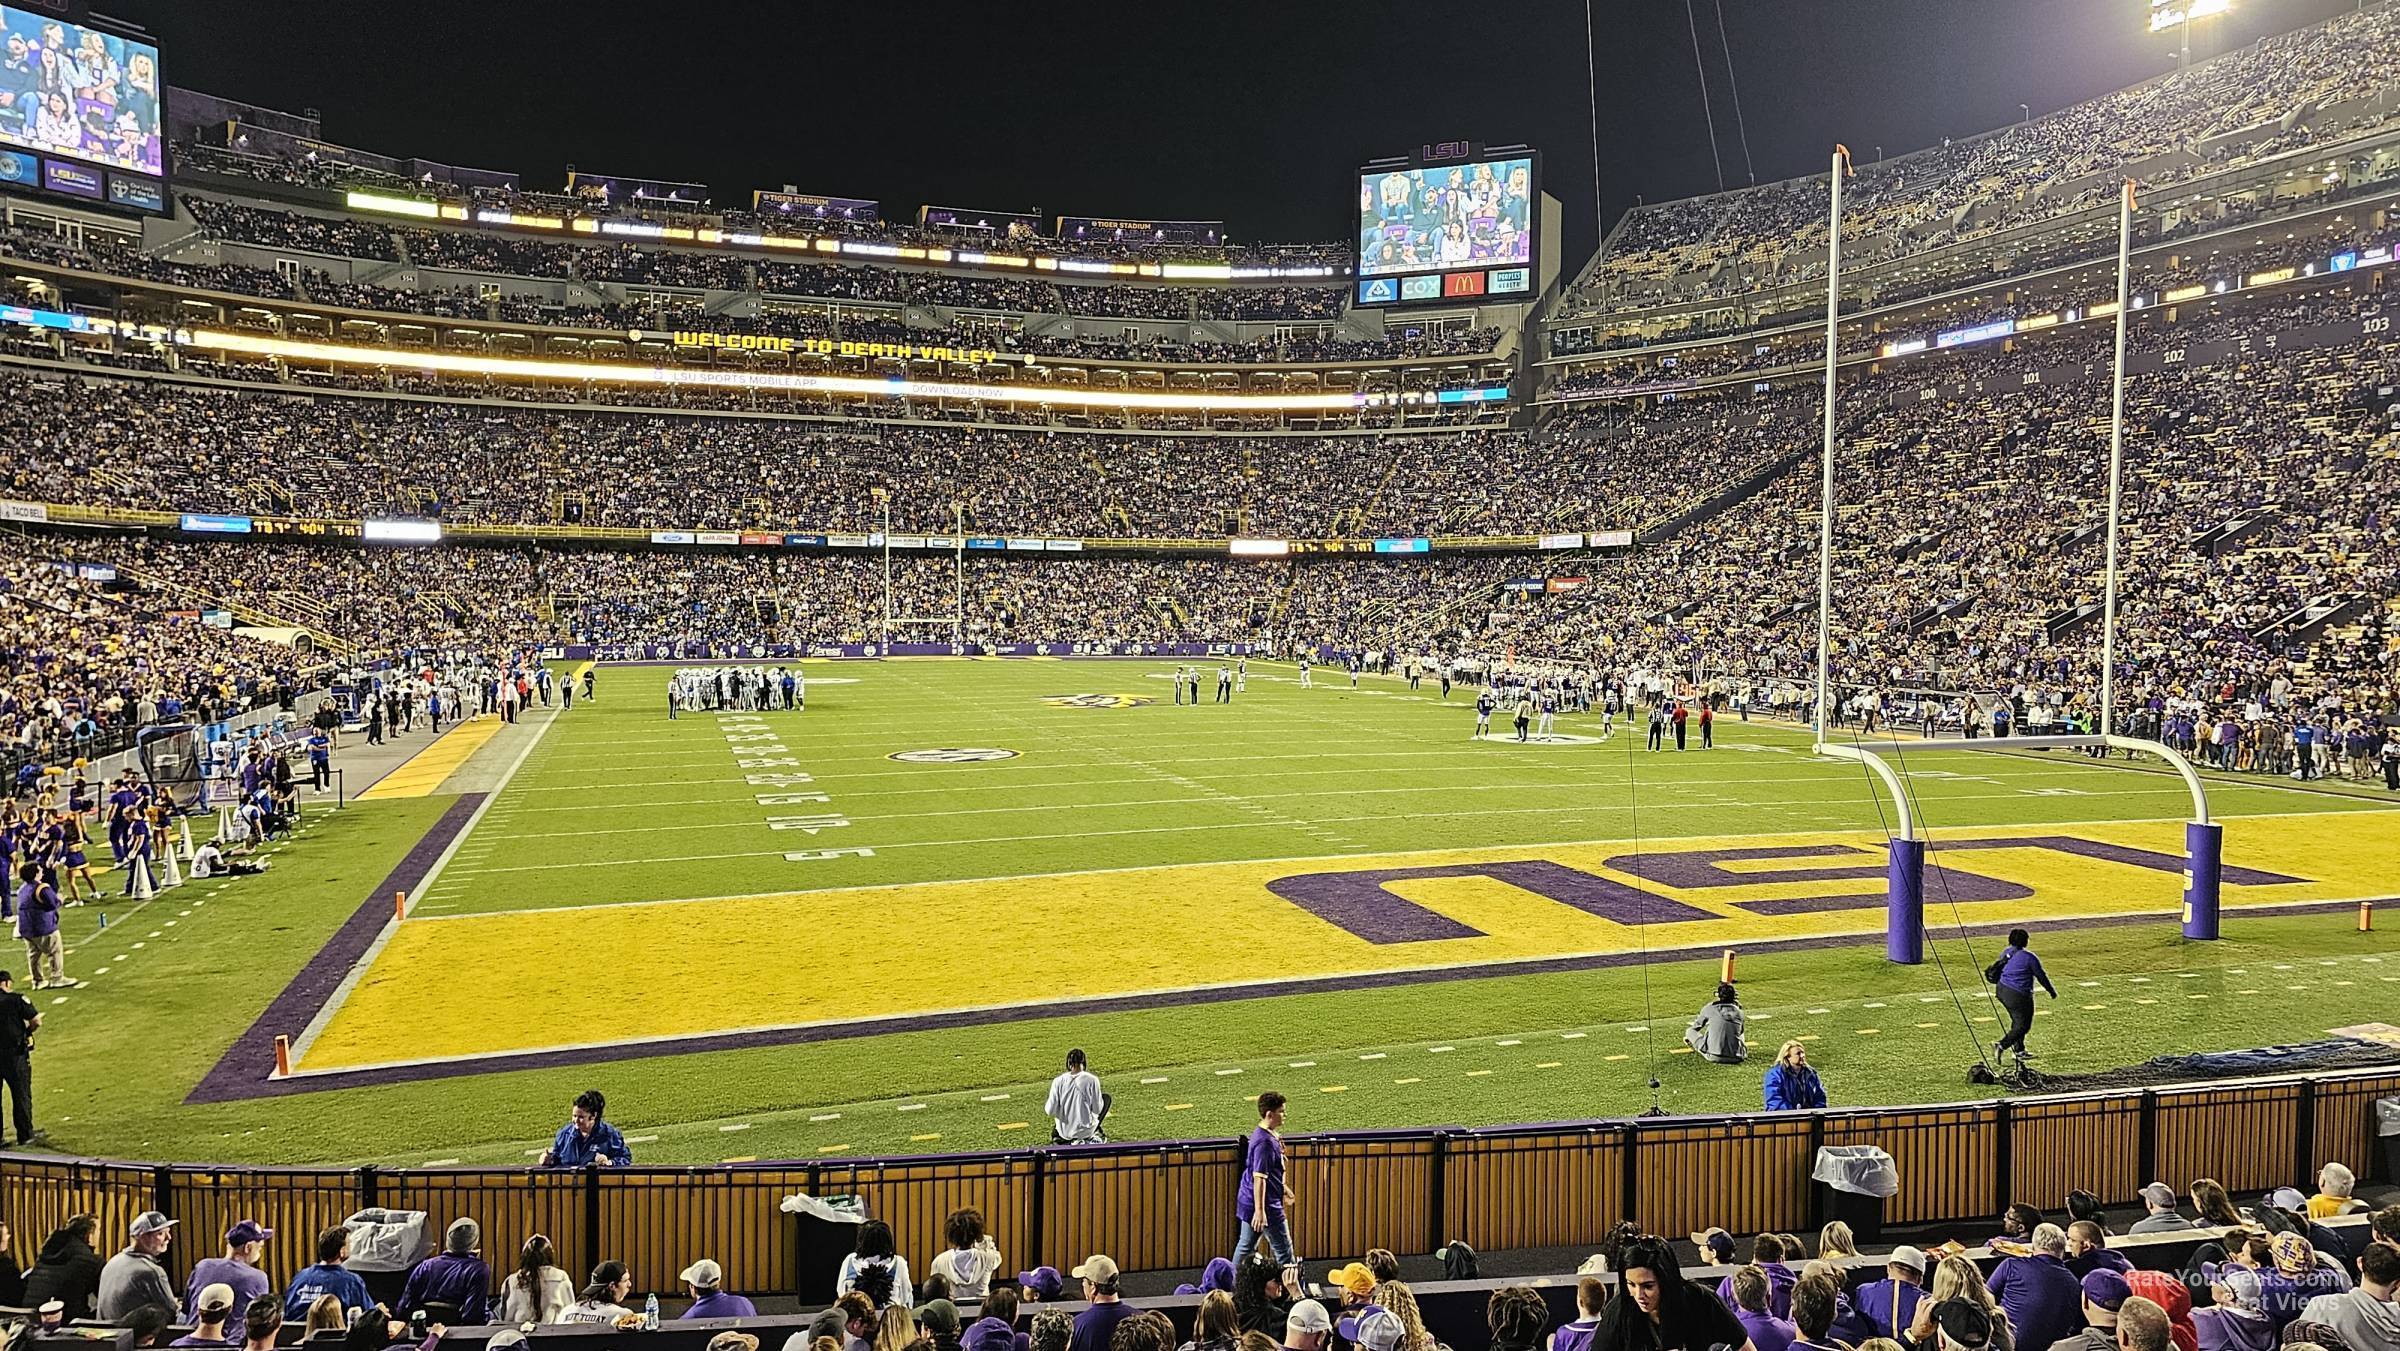 section 207, row 13 seat view  - tiger stadium